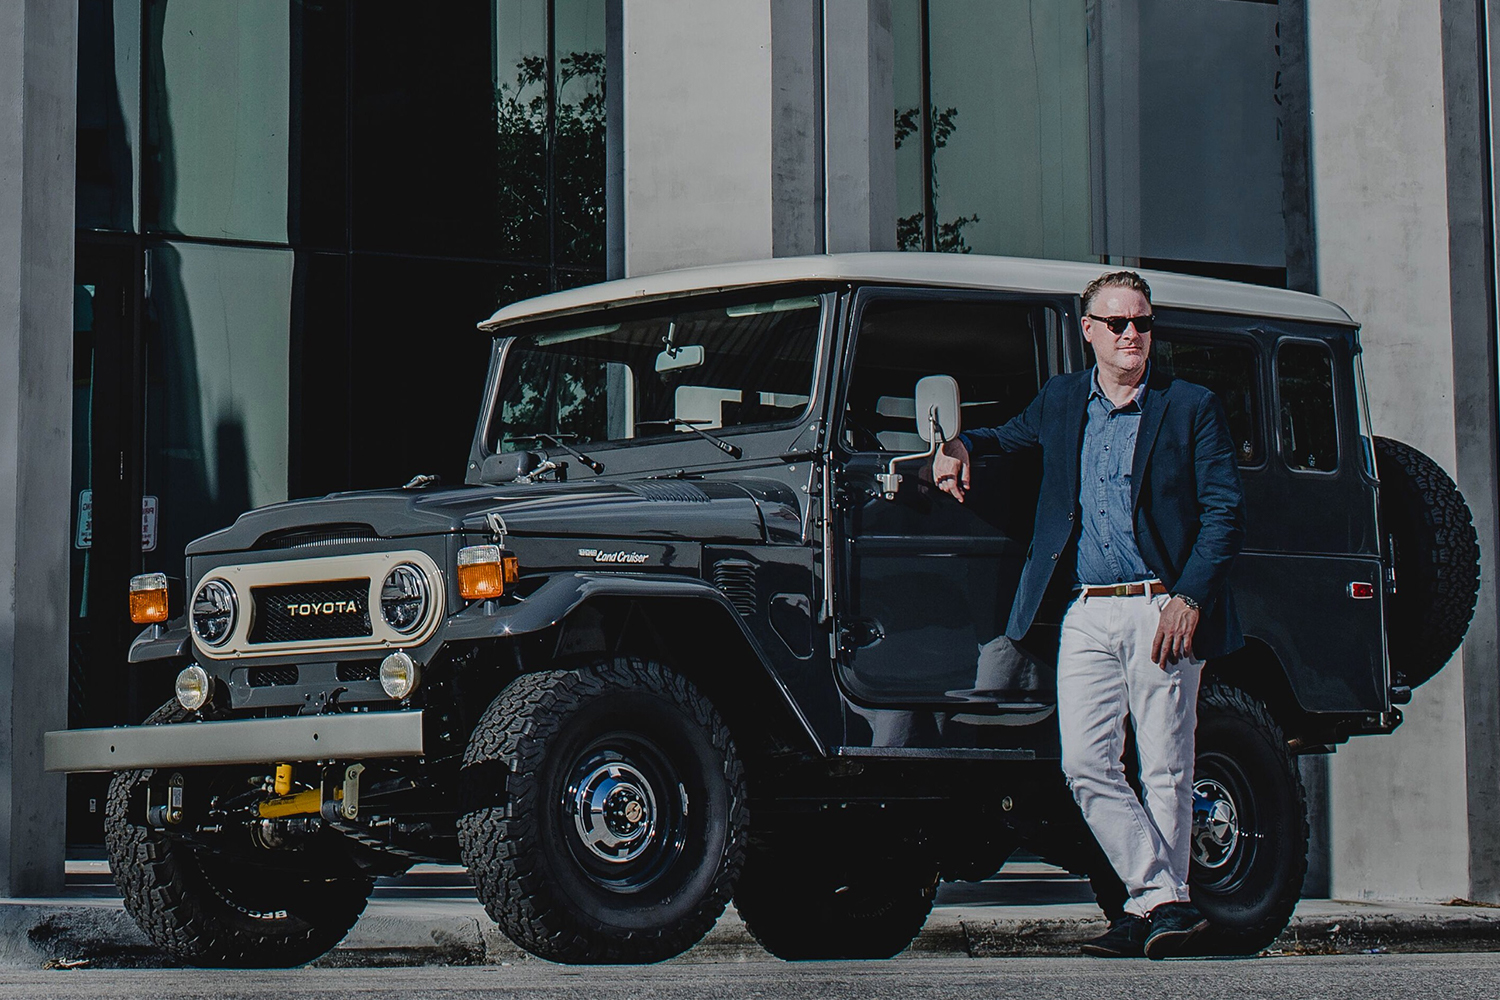 Menswear designer Todd Snyder in white pants and a blue jacket standing next to a custom Toyota Land Cruise designed in partnership with The FJ Company